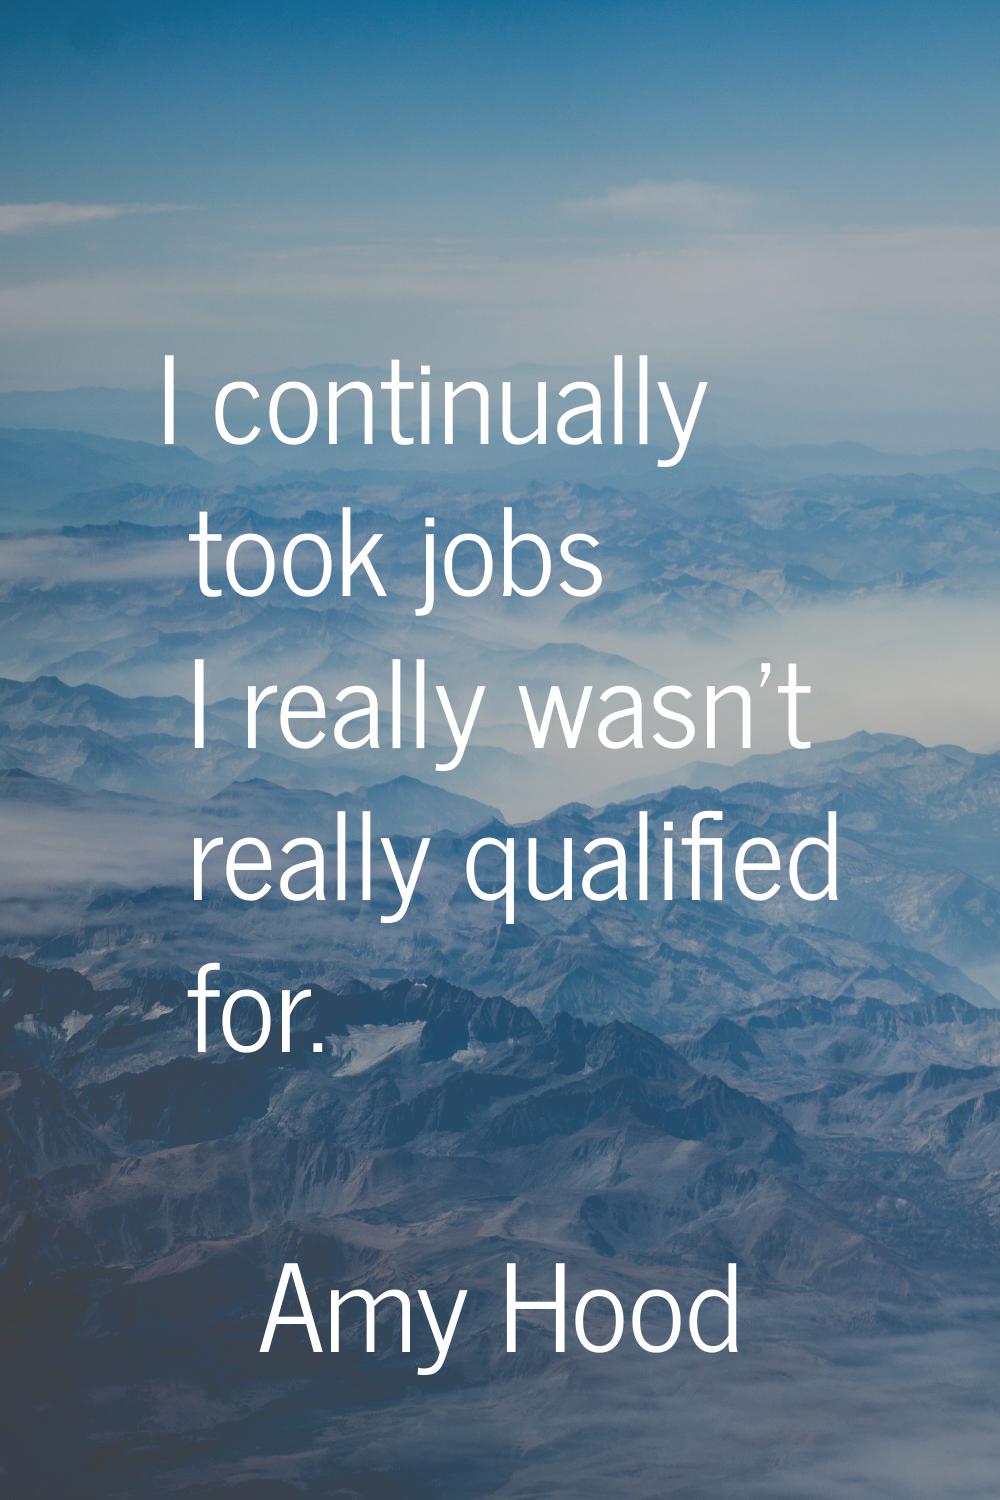 I continually took jobs I really wasn't really qualified for.